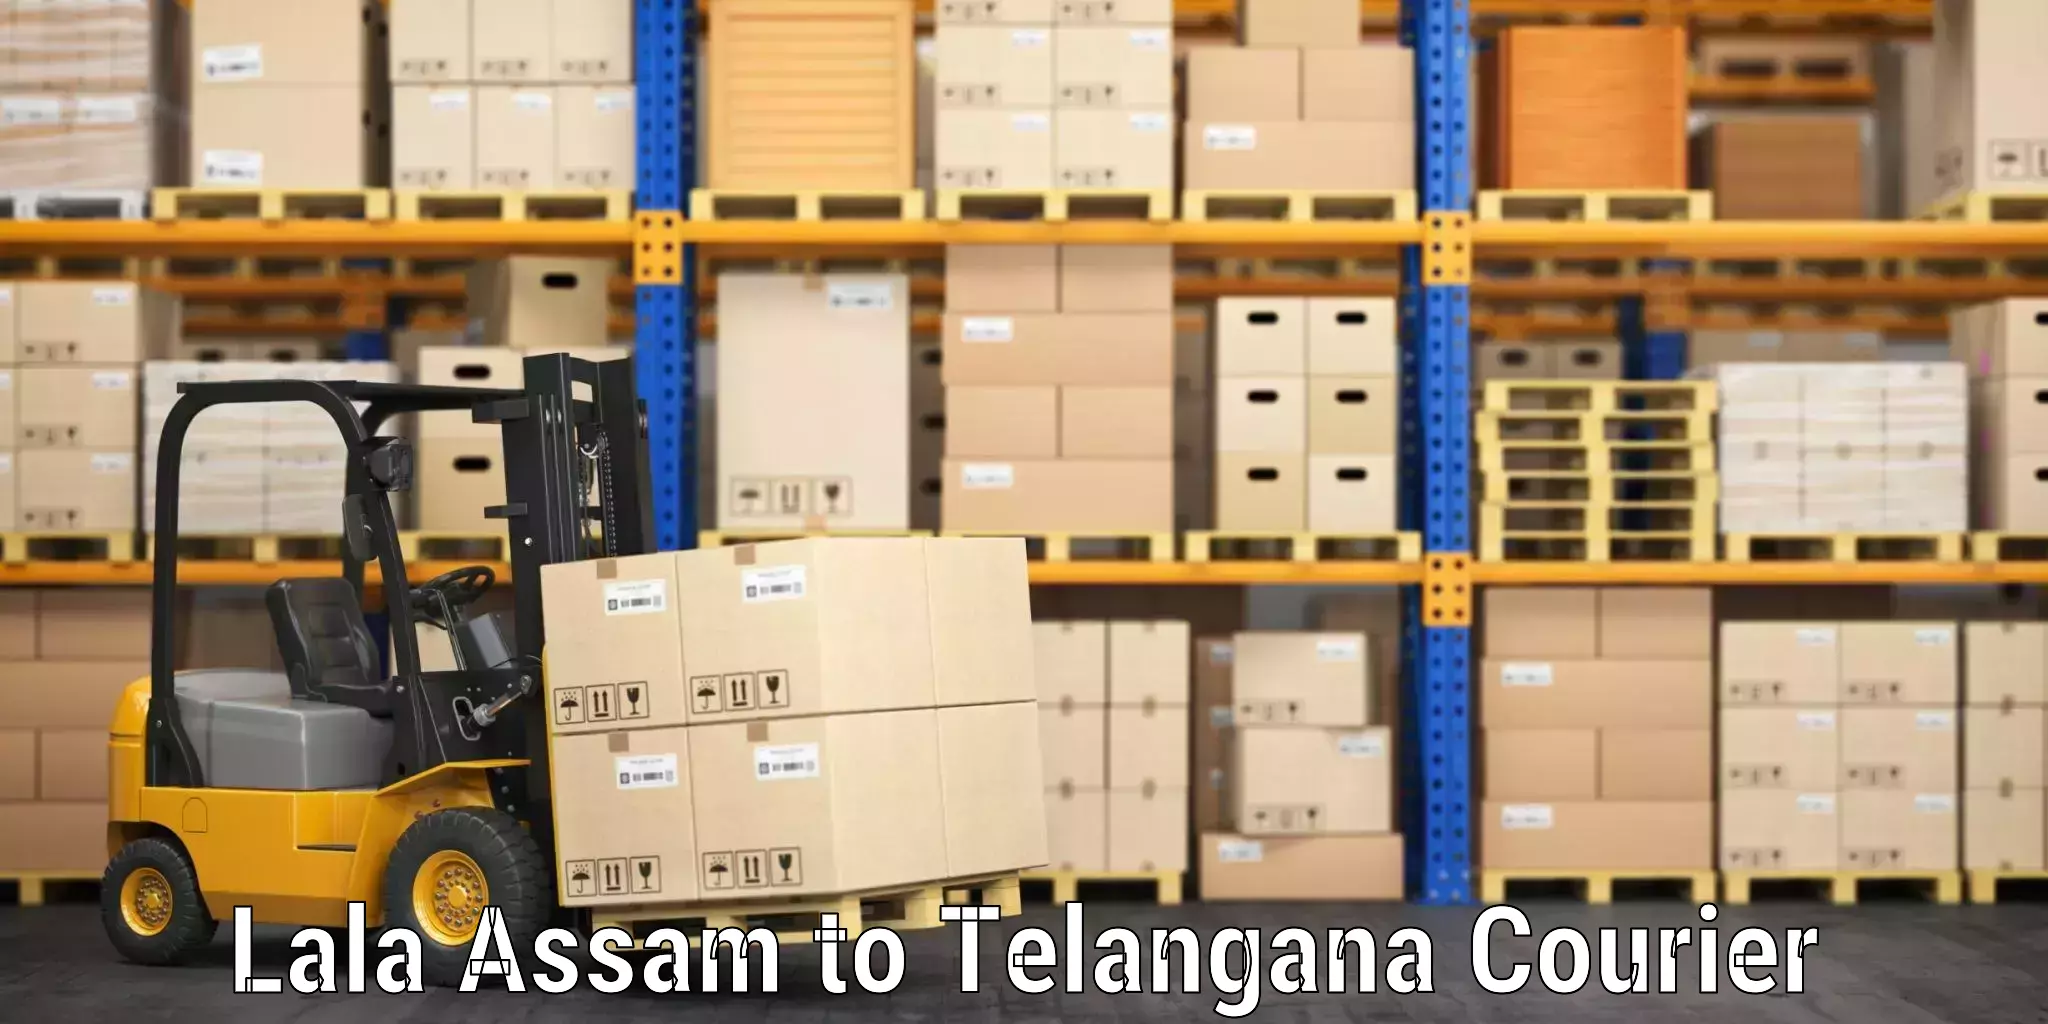 Luggage transport consultancy Lala Assam to Siddipet